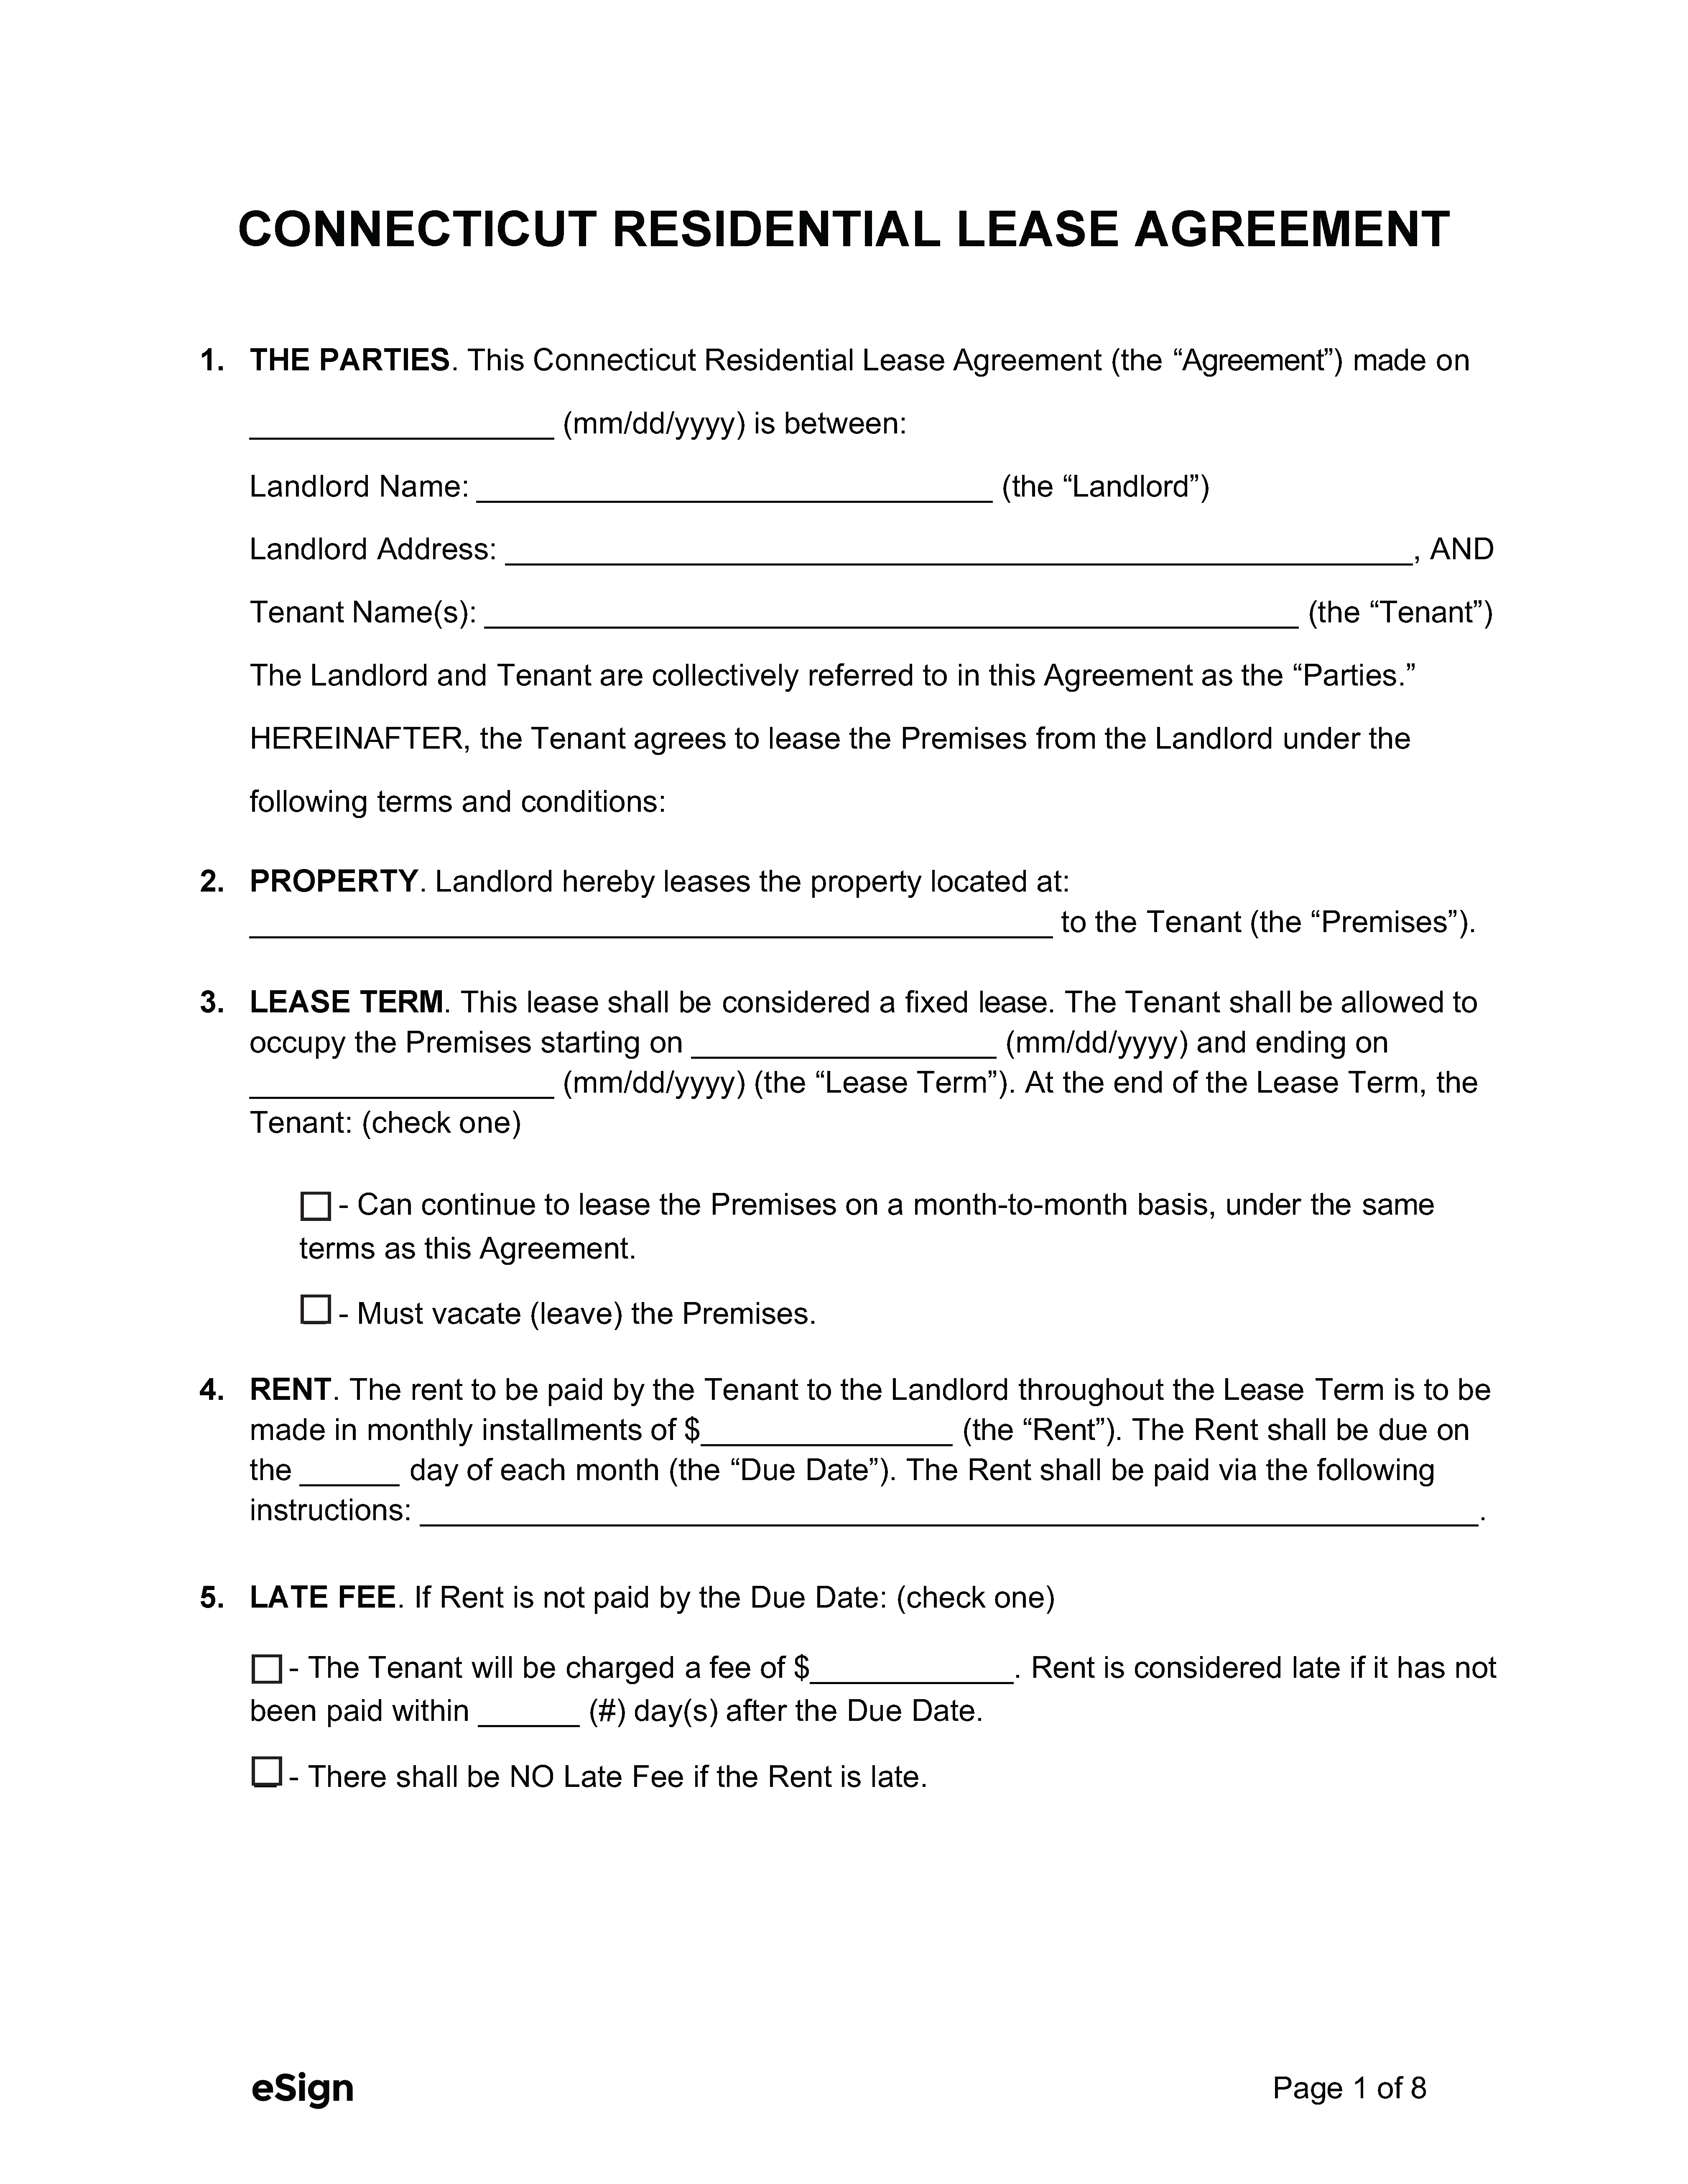 free connecticut standard residential lease agreement pdf word